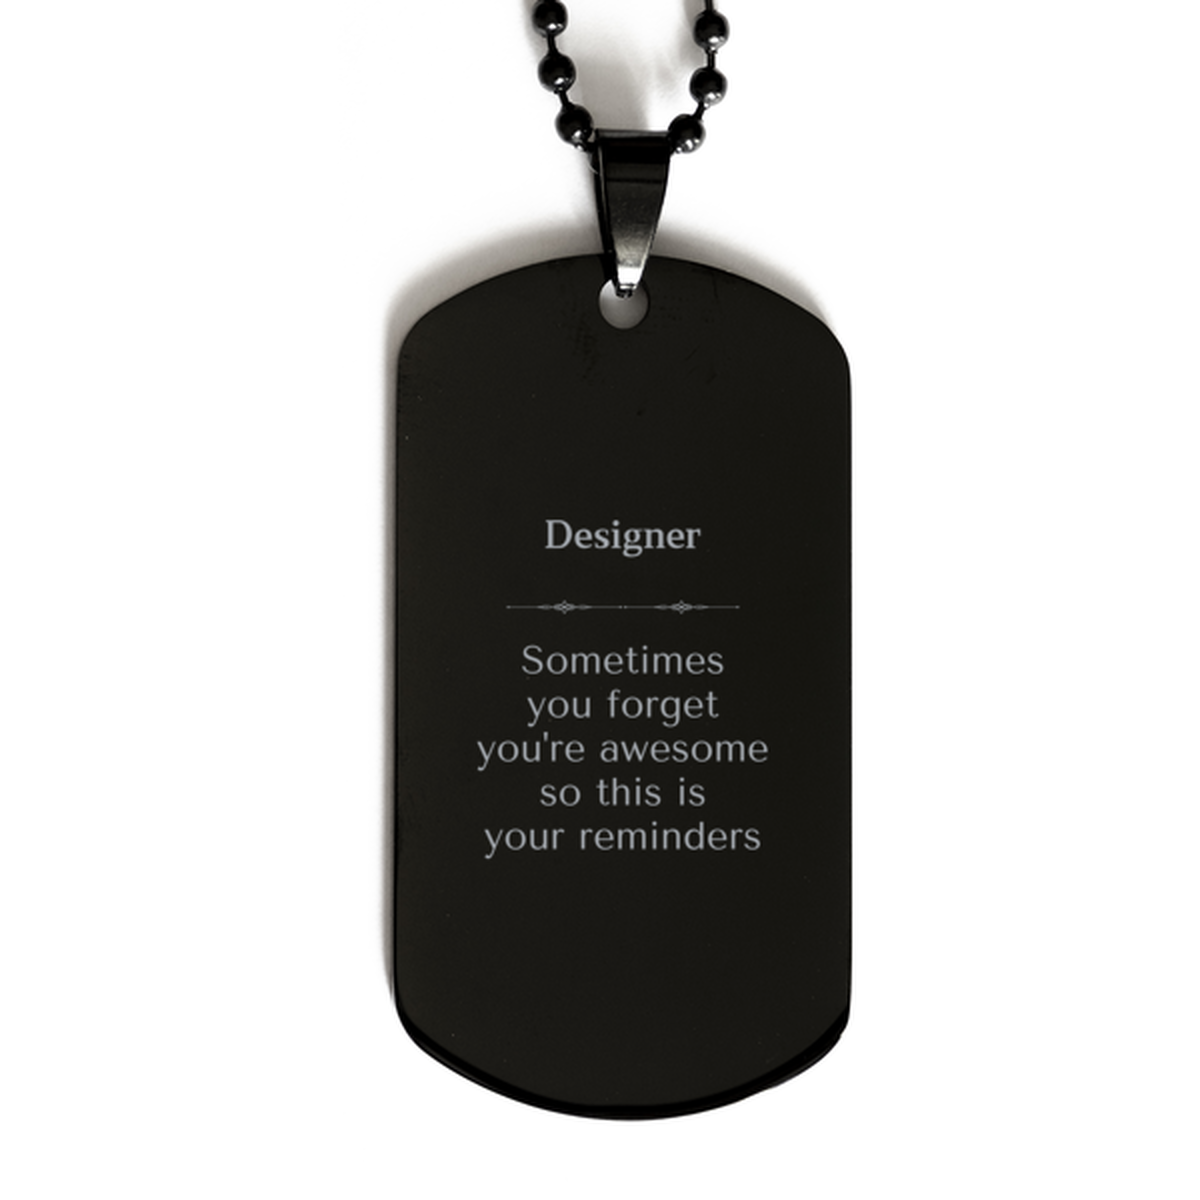 Sentimental Designer Black Dog Tag, Designer Sometimes you forget you're awesome so this is your reminders, Graduation Christmas Birthday Gifts for Designer, Men, Women, Coworkers